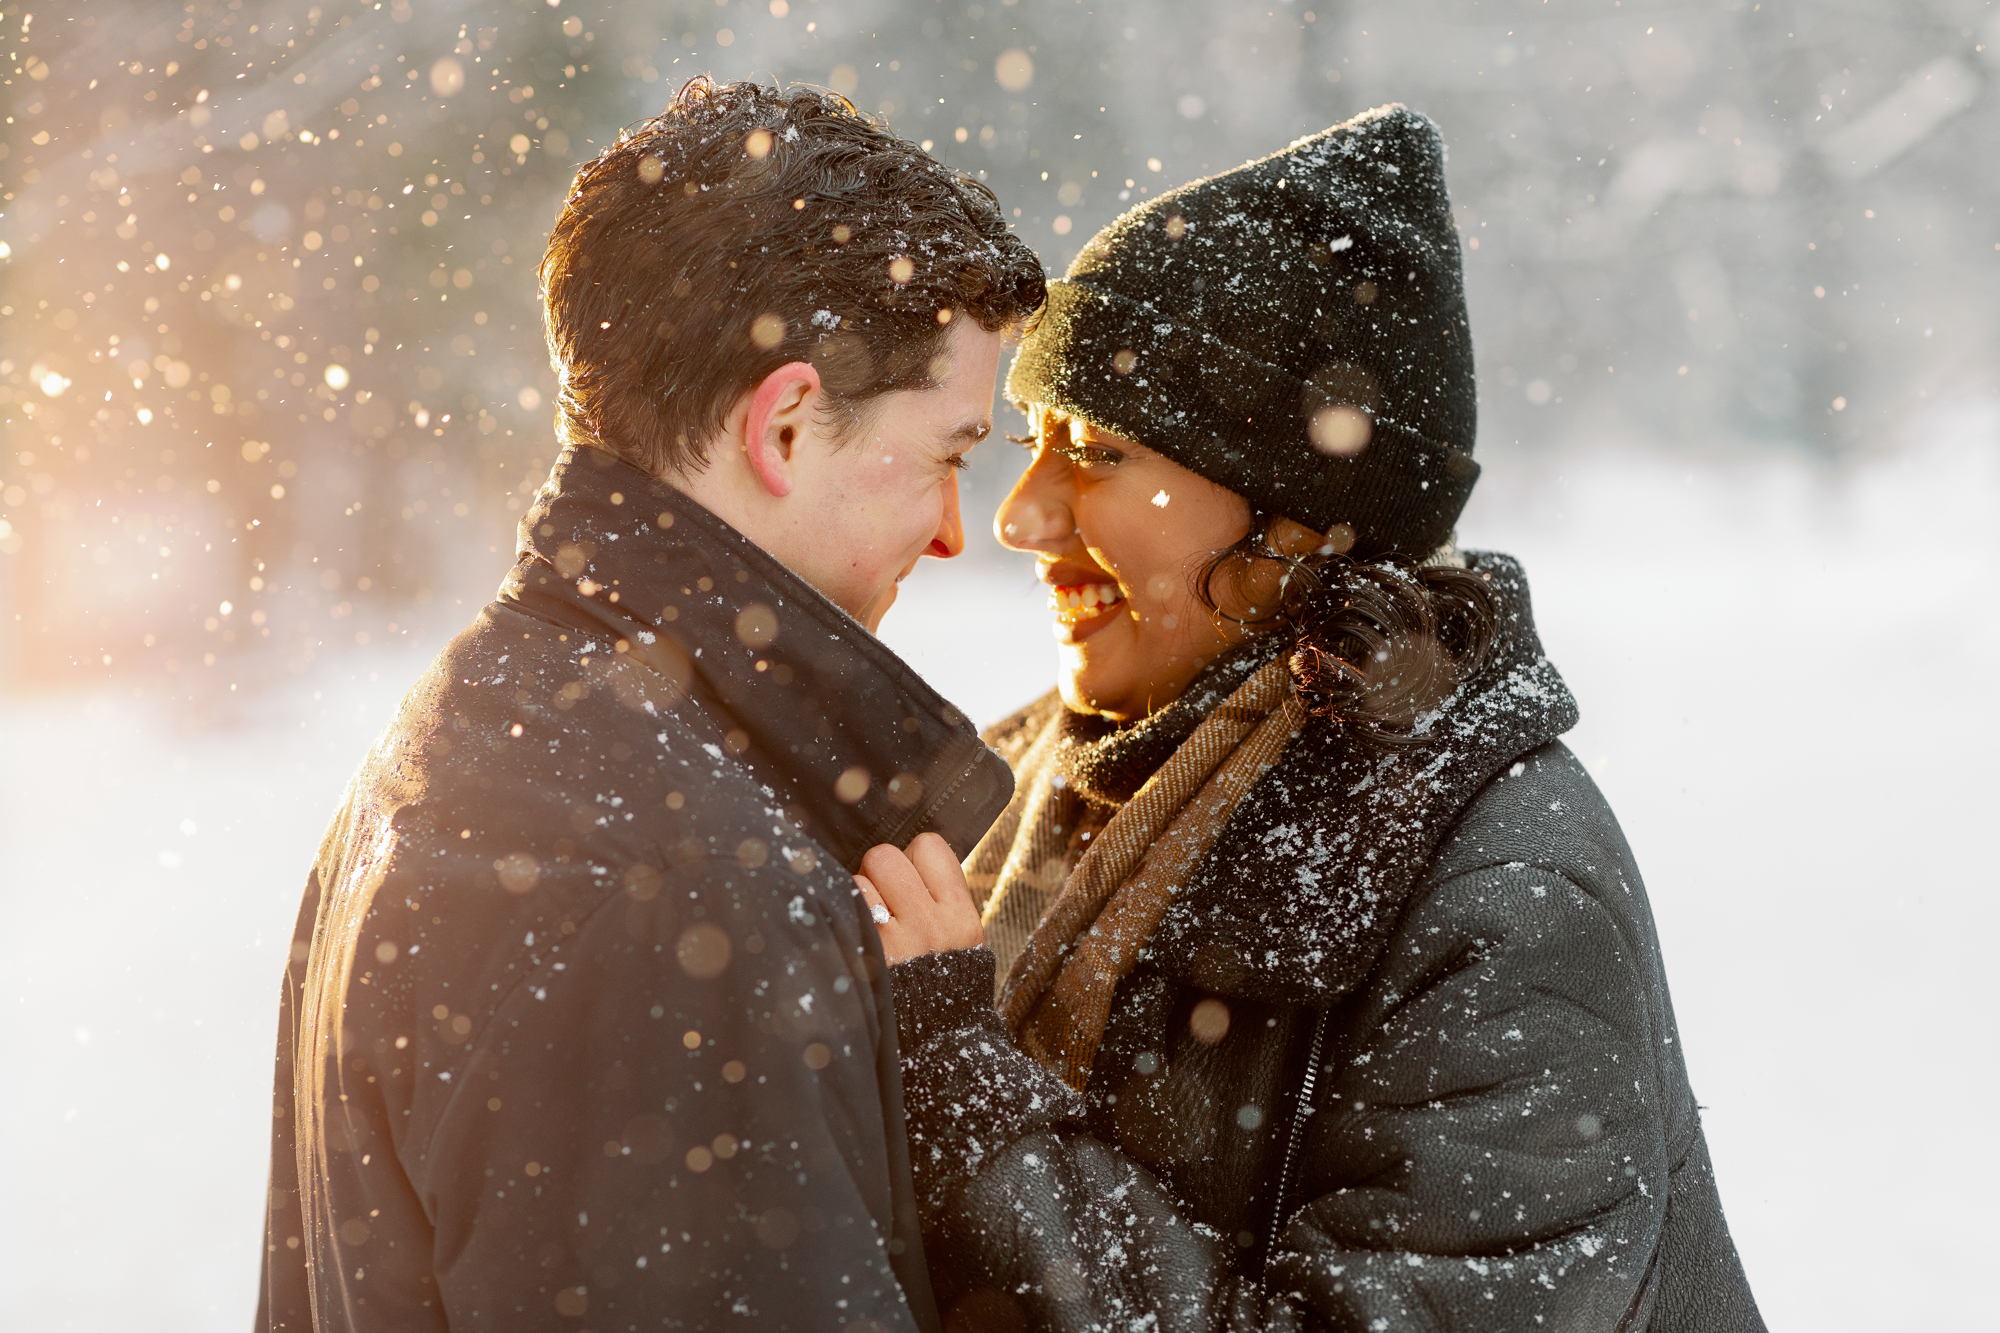 Glowing Winter Engagement Photos in Snowy Prospect Park